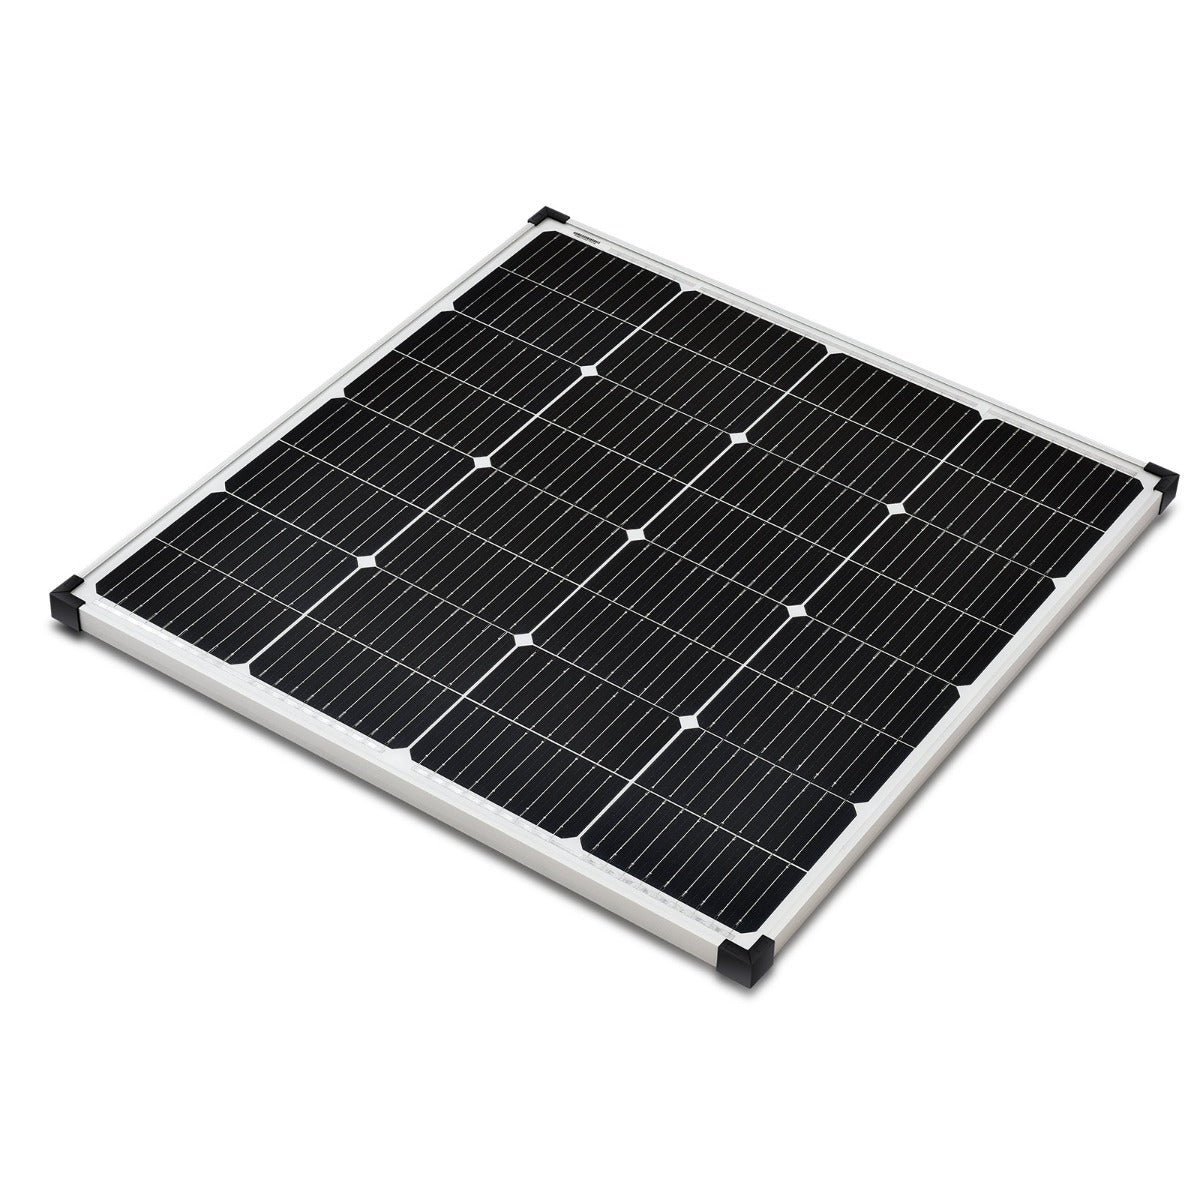 BUNDLE DEAL - LiFePO4 Battery Charging Kit 2x 100W Solar Panel 20A MPPT Controller Bluetooth with Cable